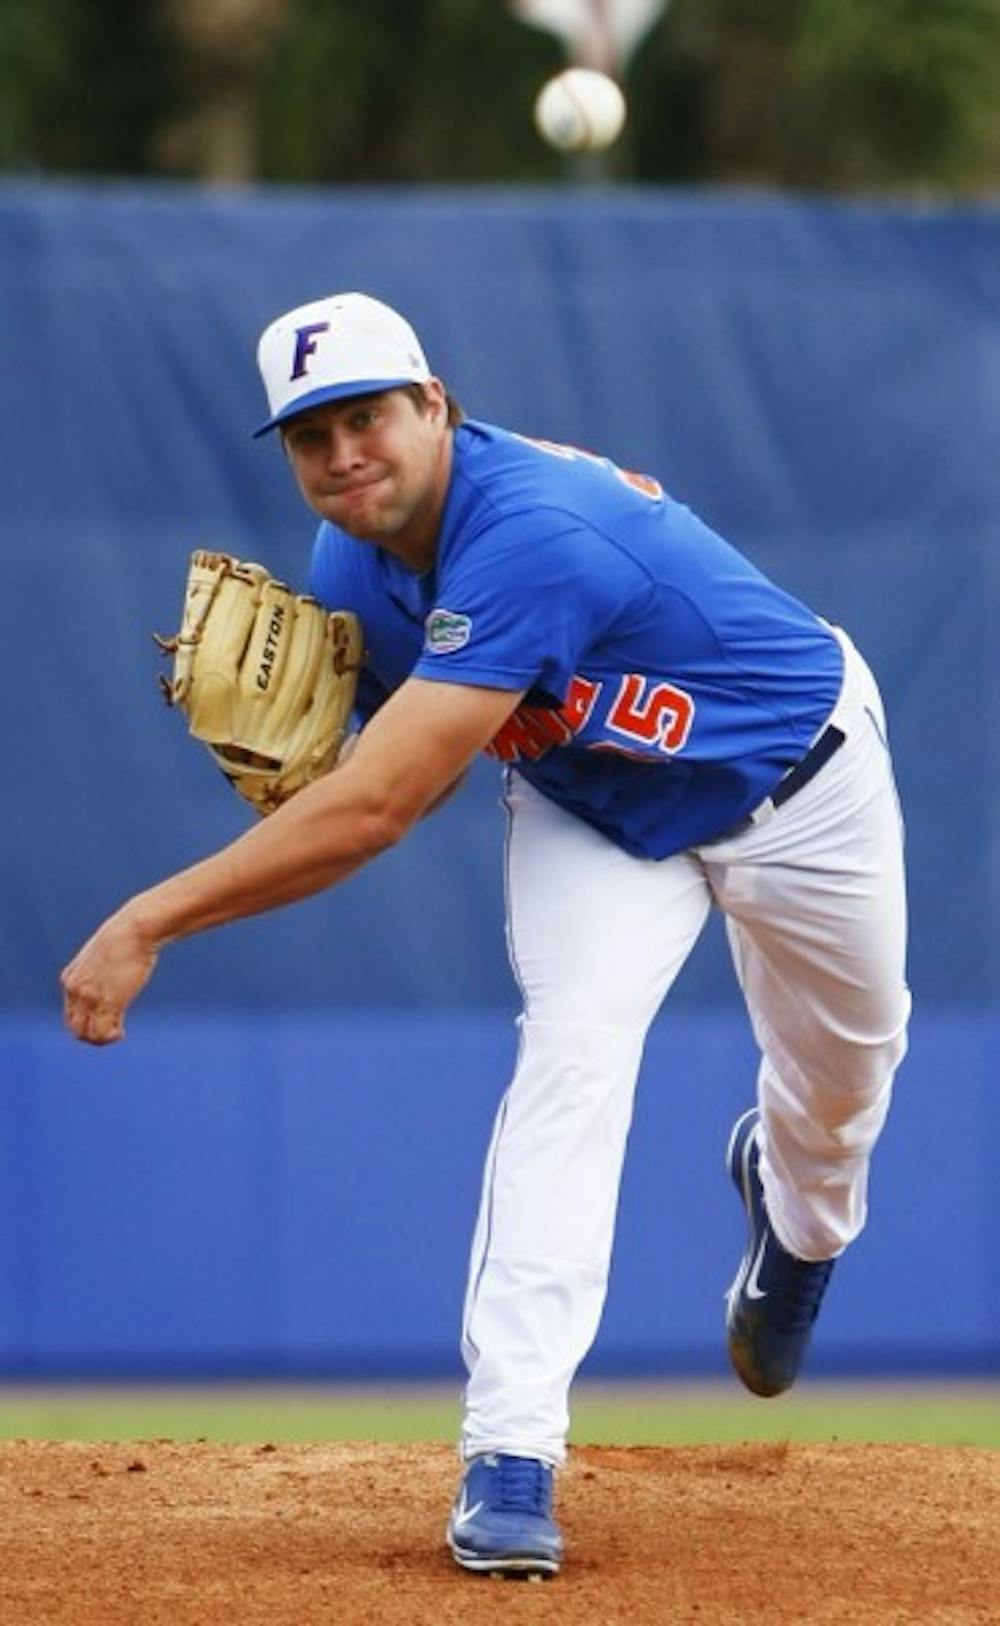 <p>Brian Johnson yielded three earned runs in six innings, striking out six batters in the Gators' 8-3 win against the Eagles on Saturday.</p>